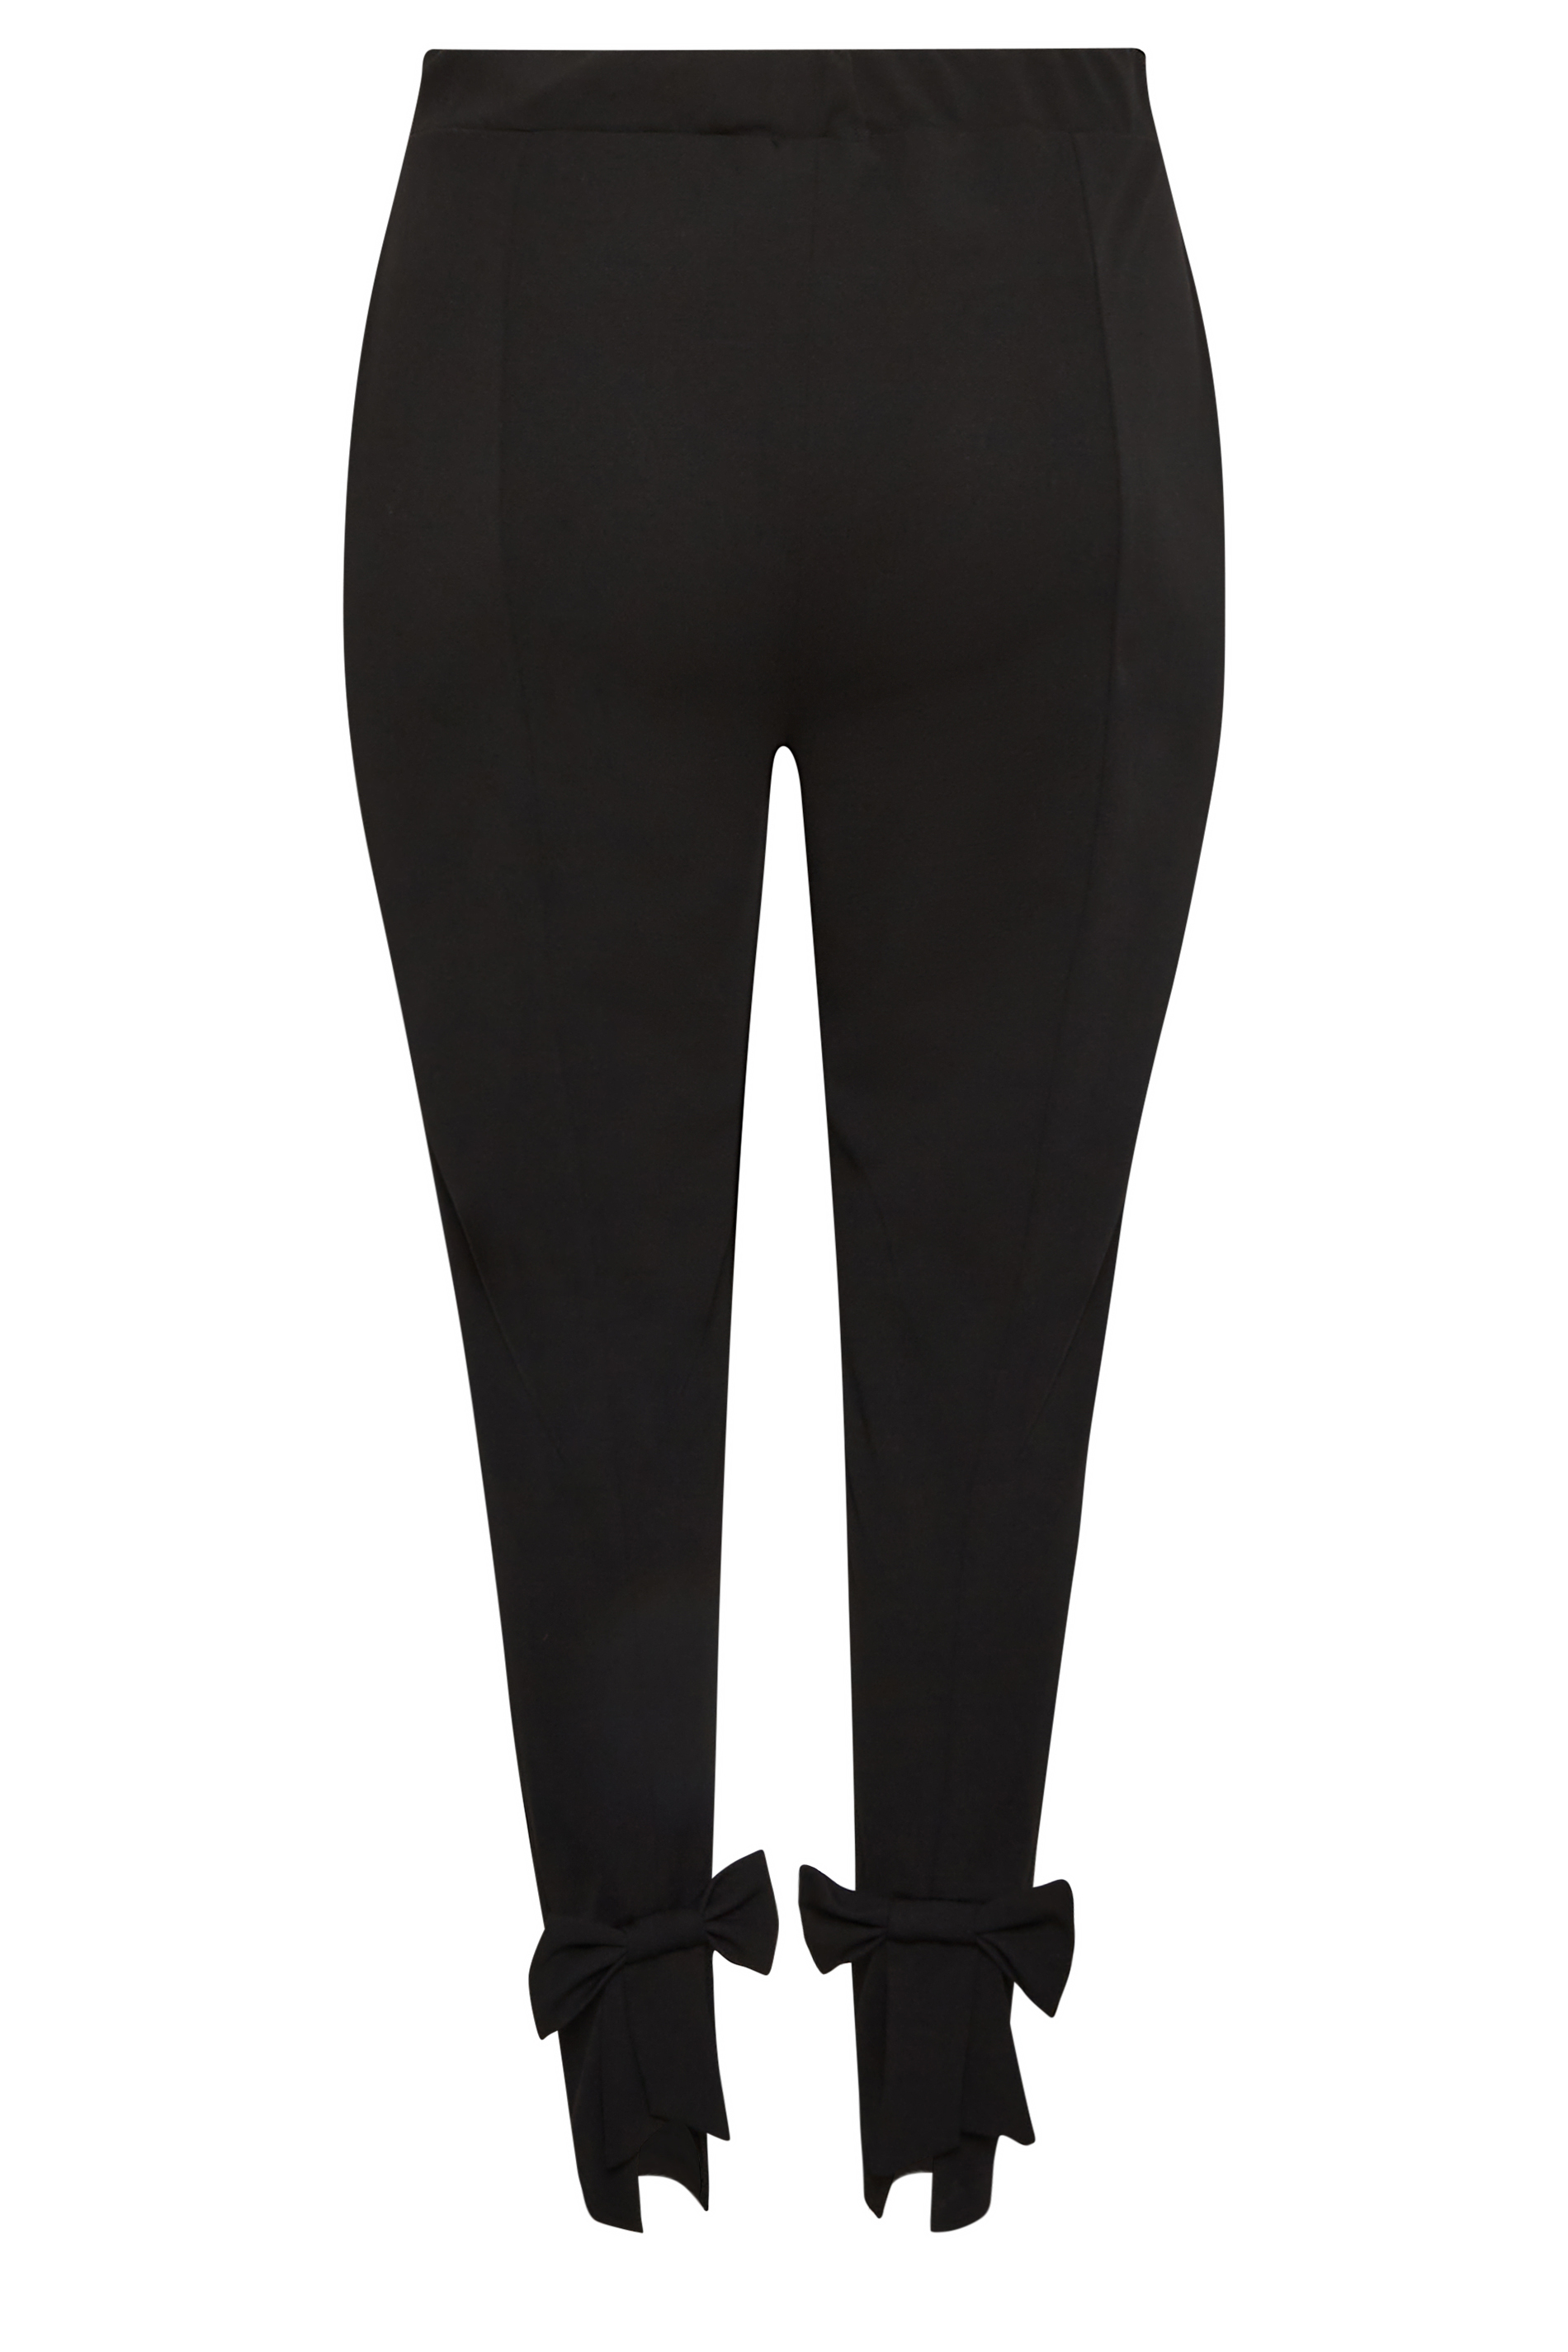 YOURS LONDON Plus Size Black Bow Hem Tapered Trousers